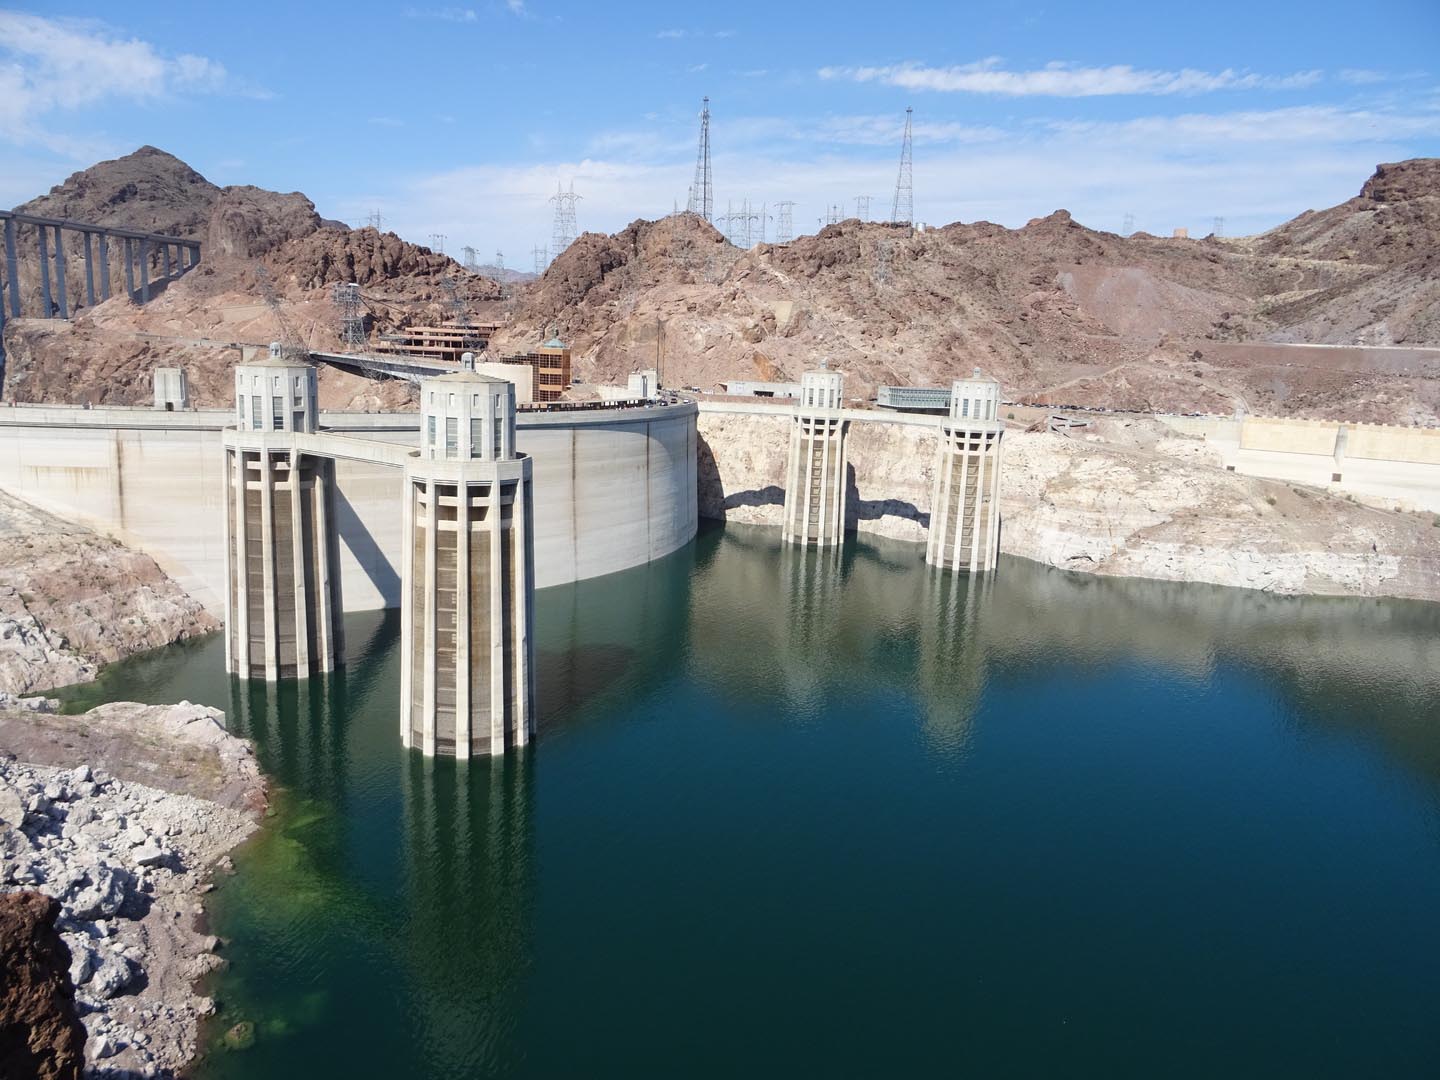 Hoover dam with low water levels